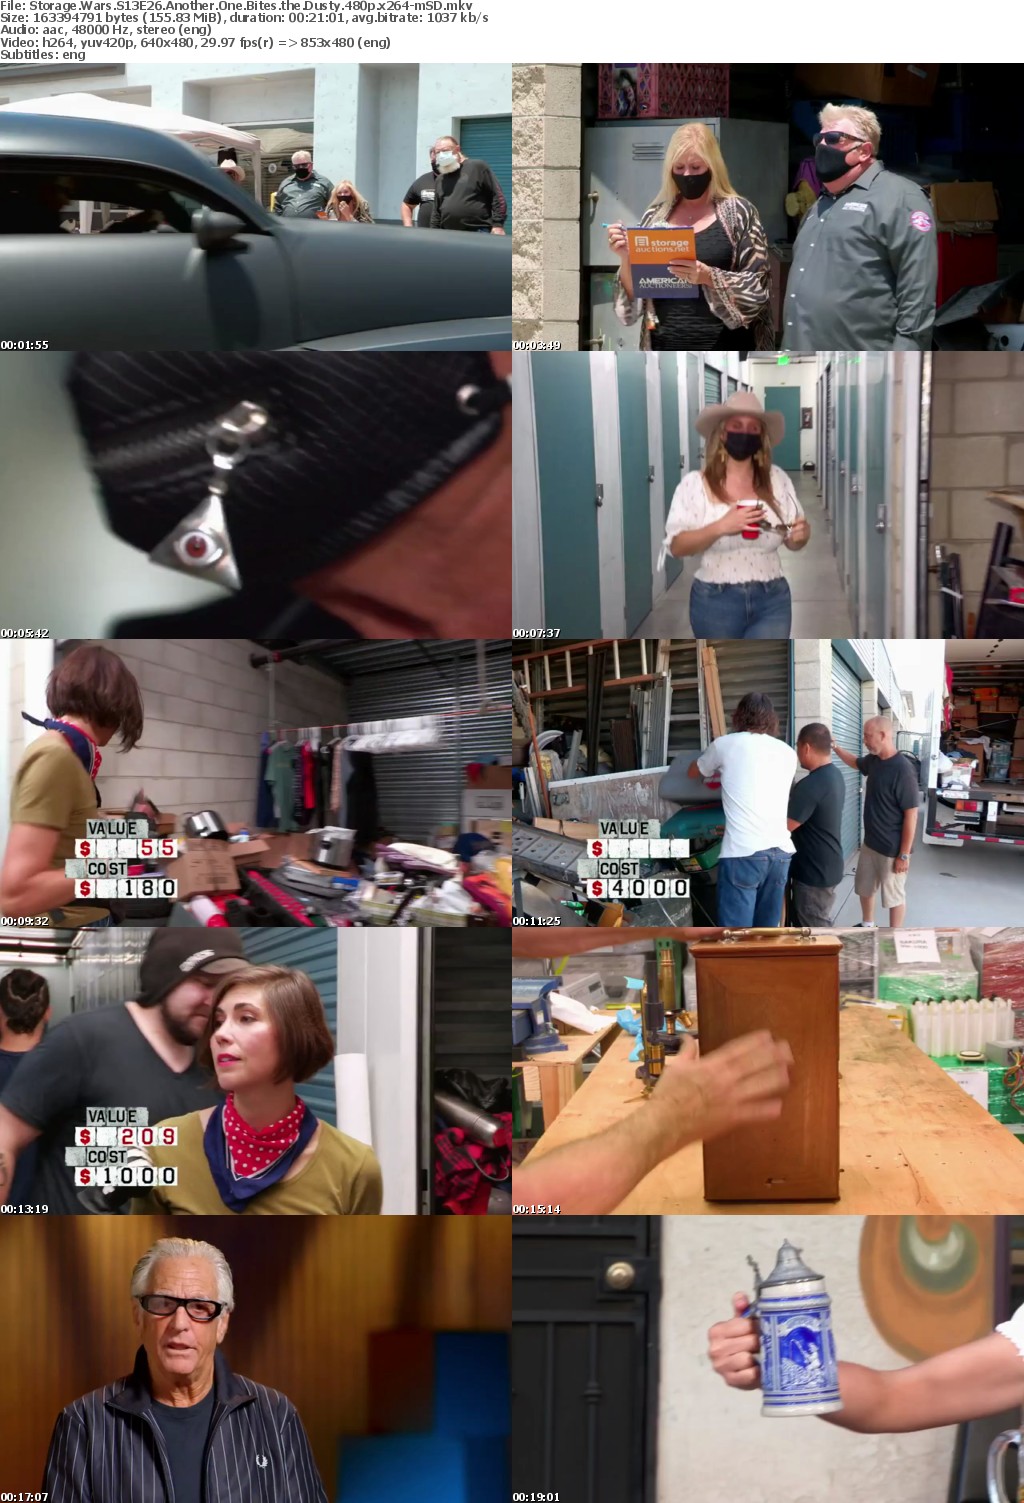 Storage Wars S13E26 Another One Bites the Dusty 480p x264-mSD